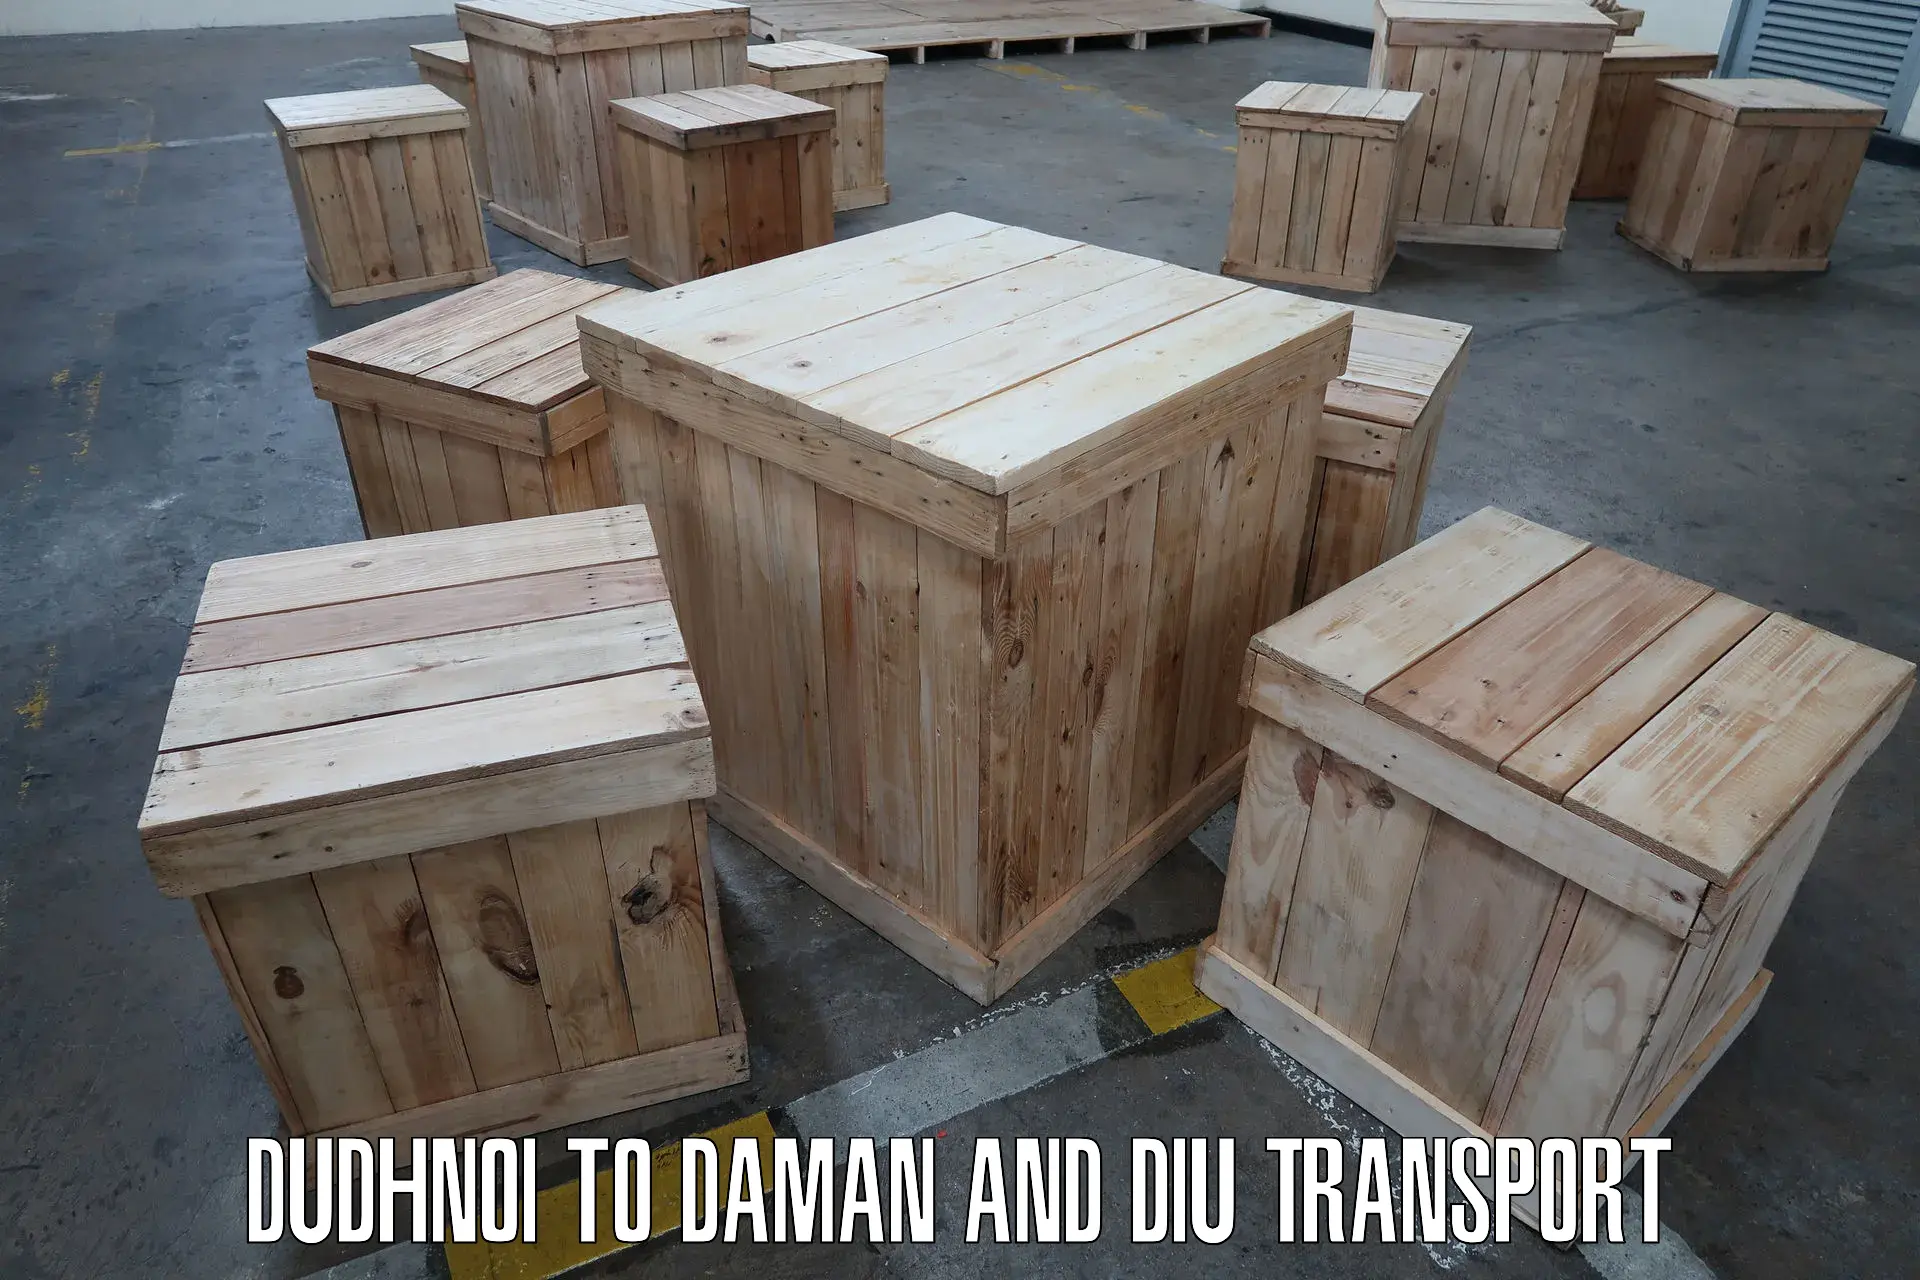 Truck transport companies in India Dudhnoi to Daman and Diu